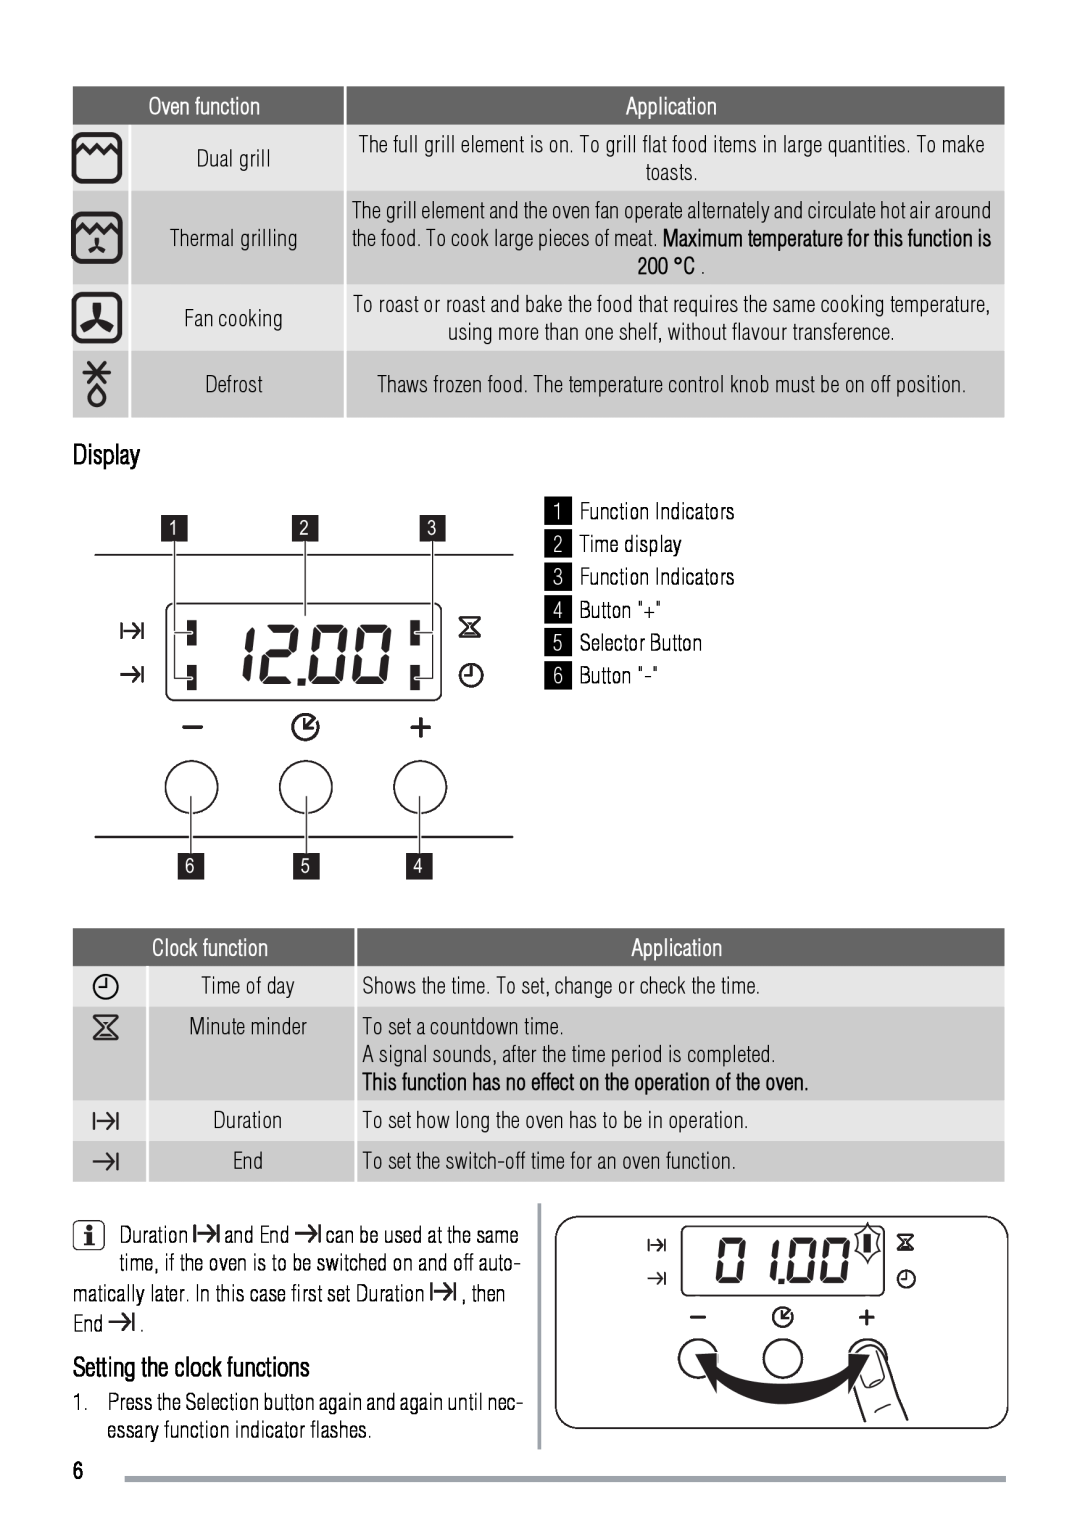 Zanussi ZOB 383 user manual Display, Setting the clock functions, Time display, Button + 